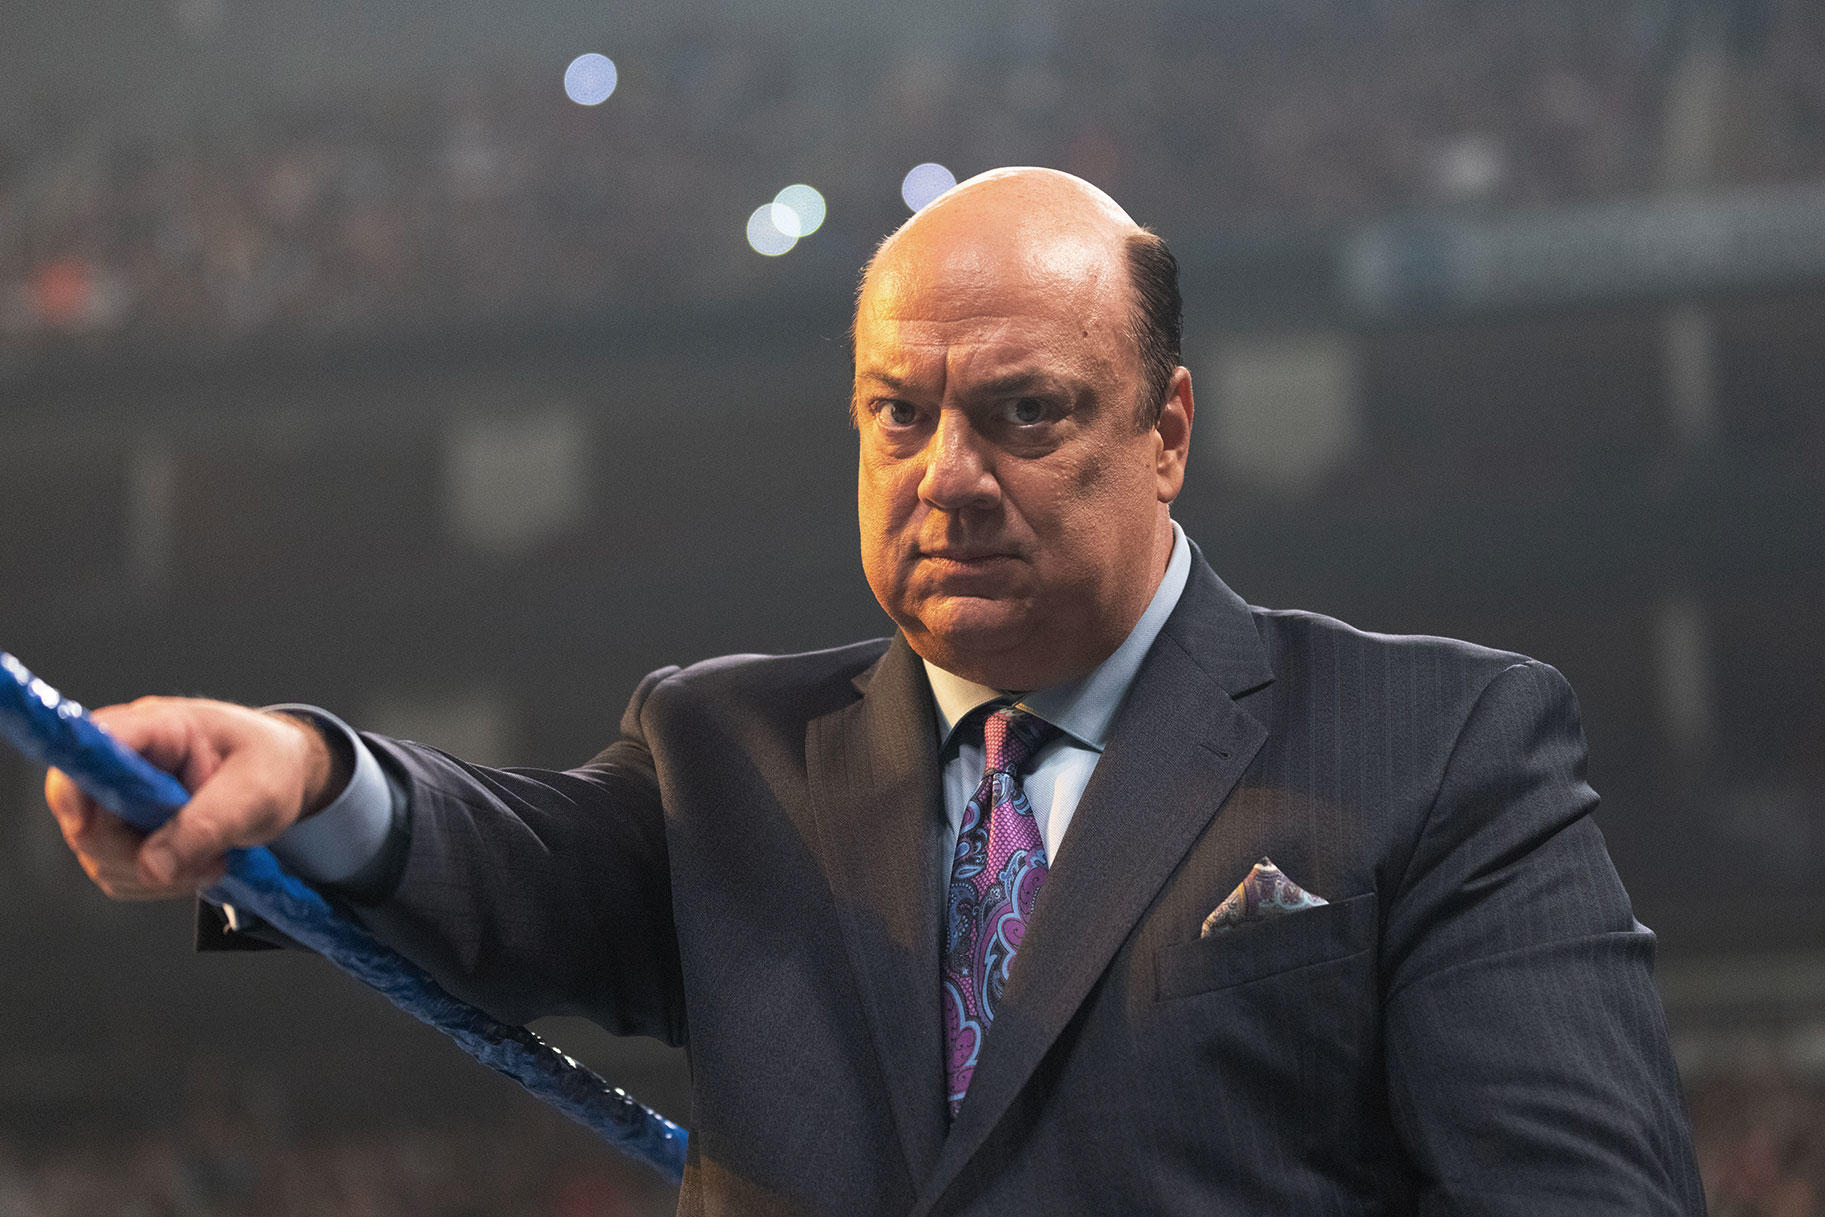 Paul Heyman to Direct and Executive Produce Biography: WWE Legends Episode on Roman Reigns